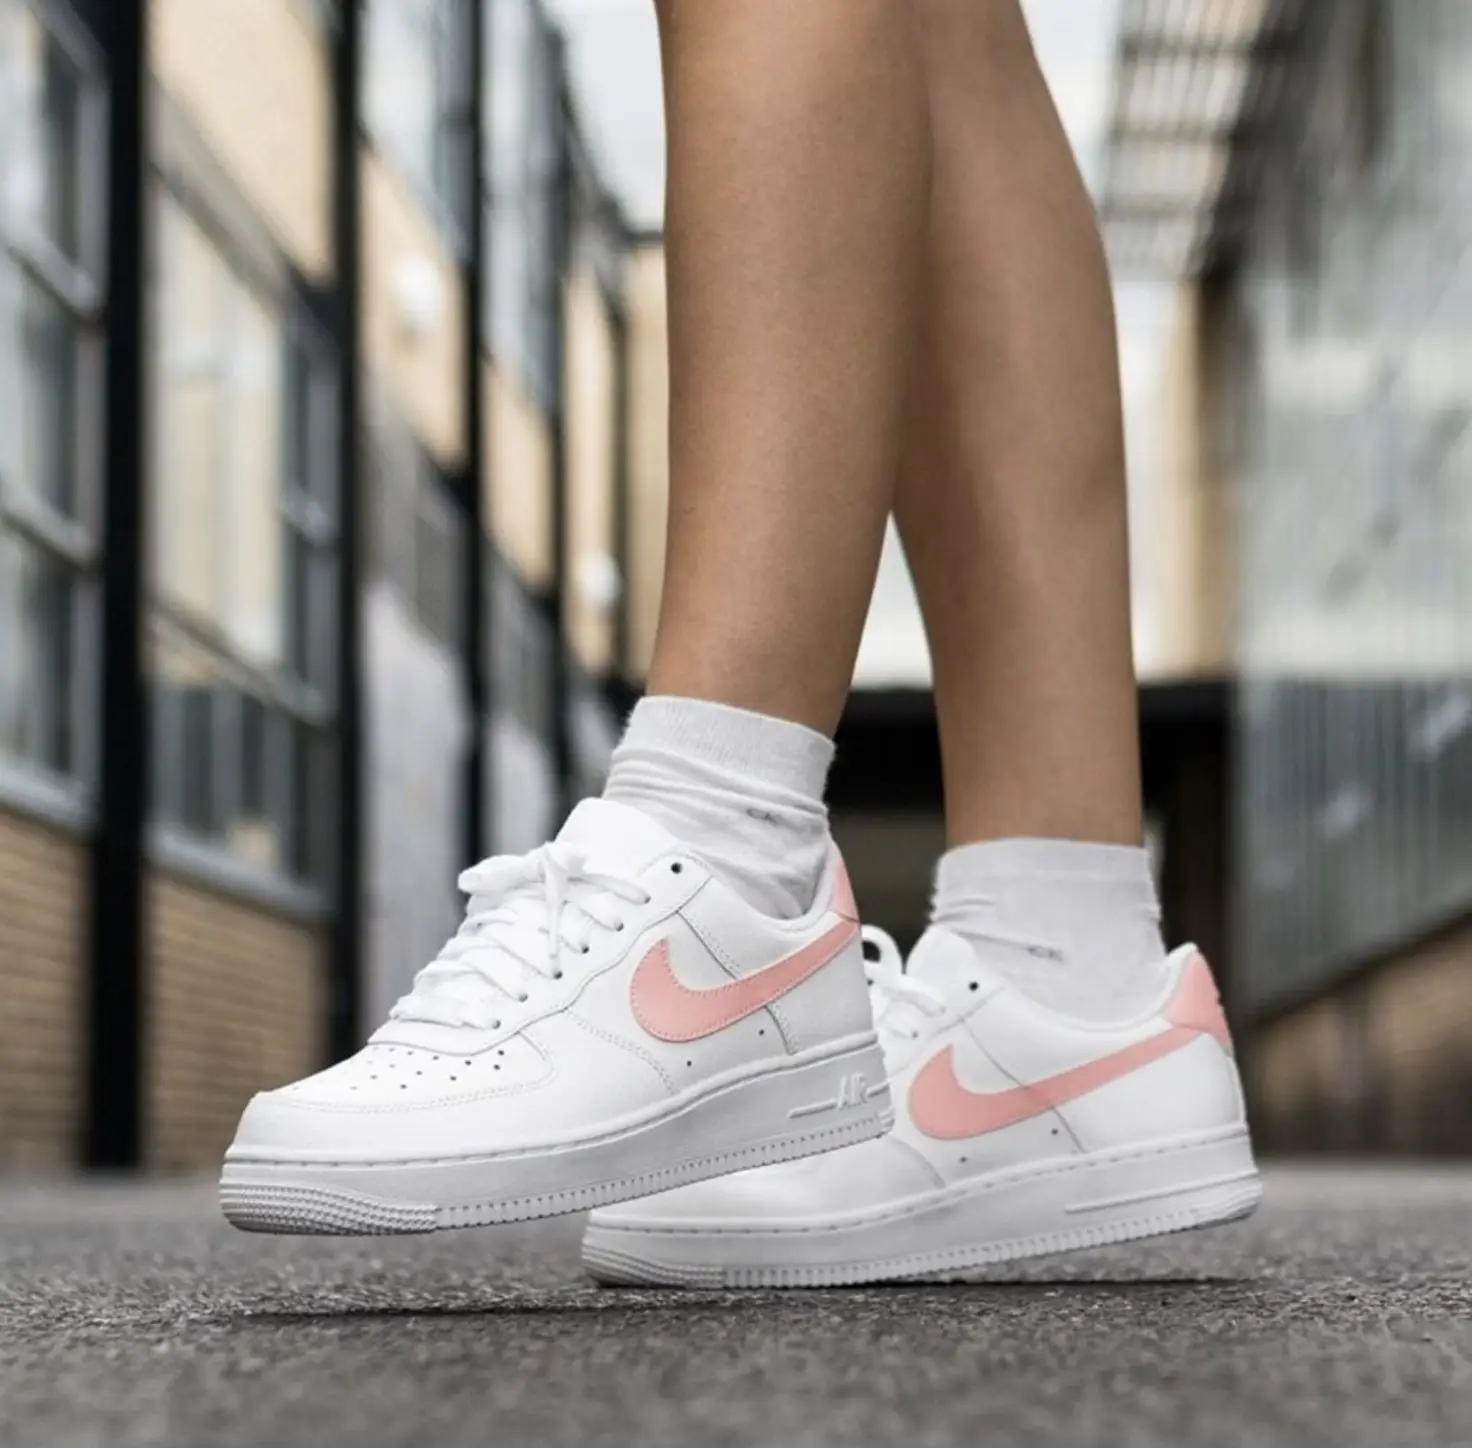 The Pink Nike Sneakers You Need In Your Rotation | The Sole Supplier